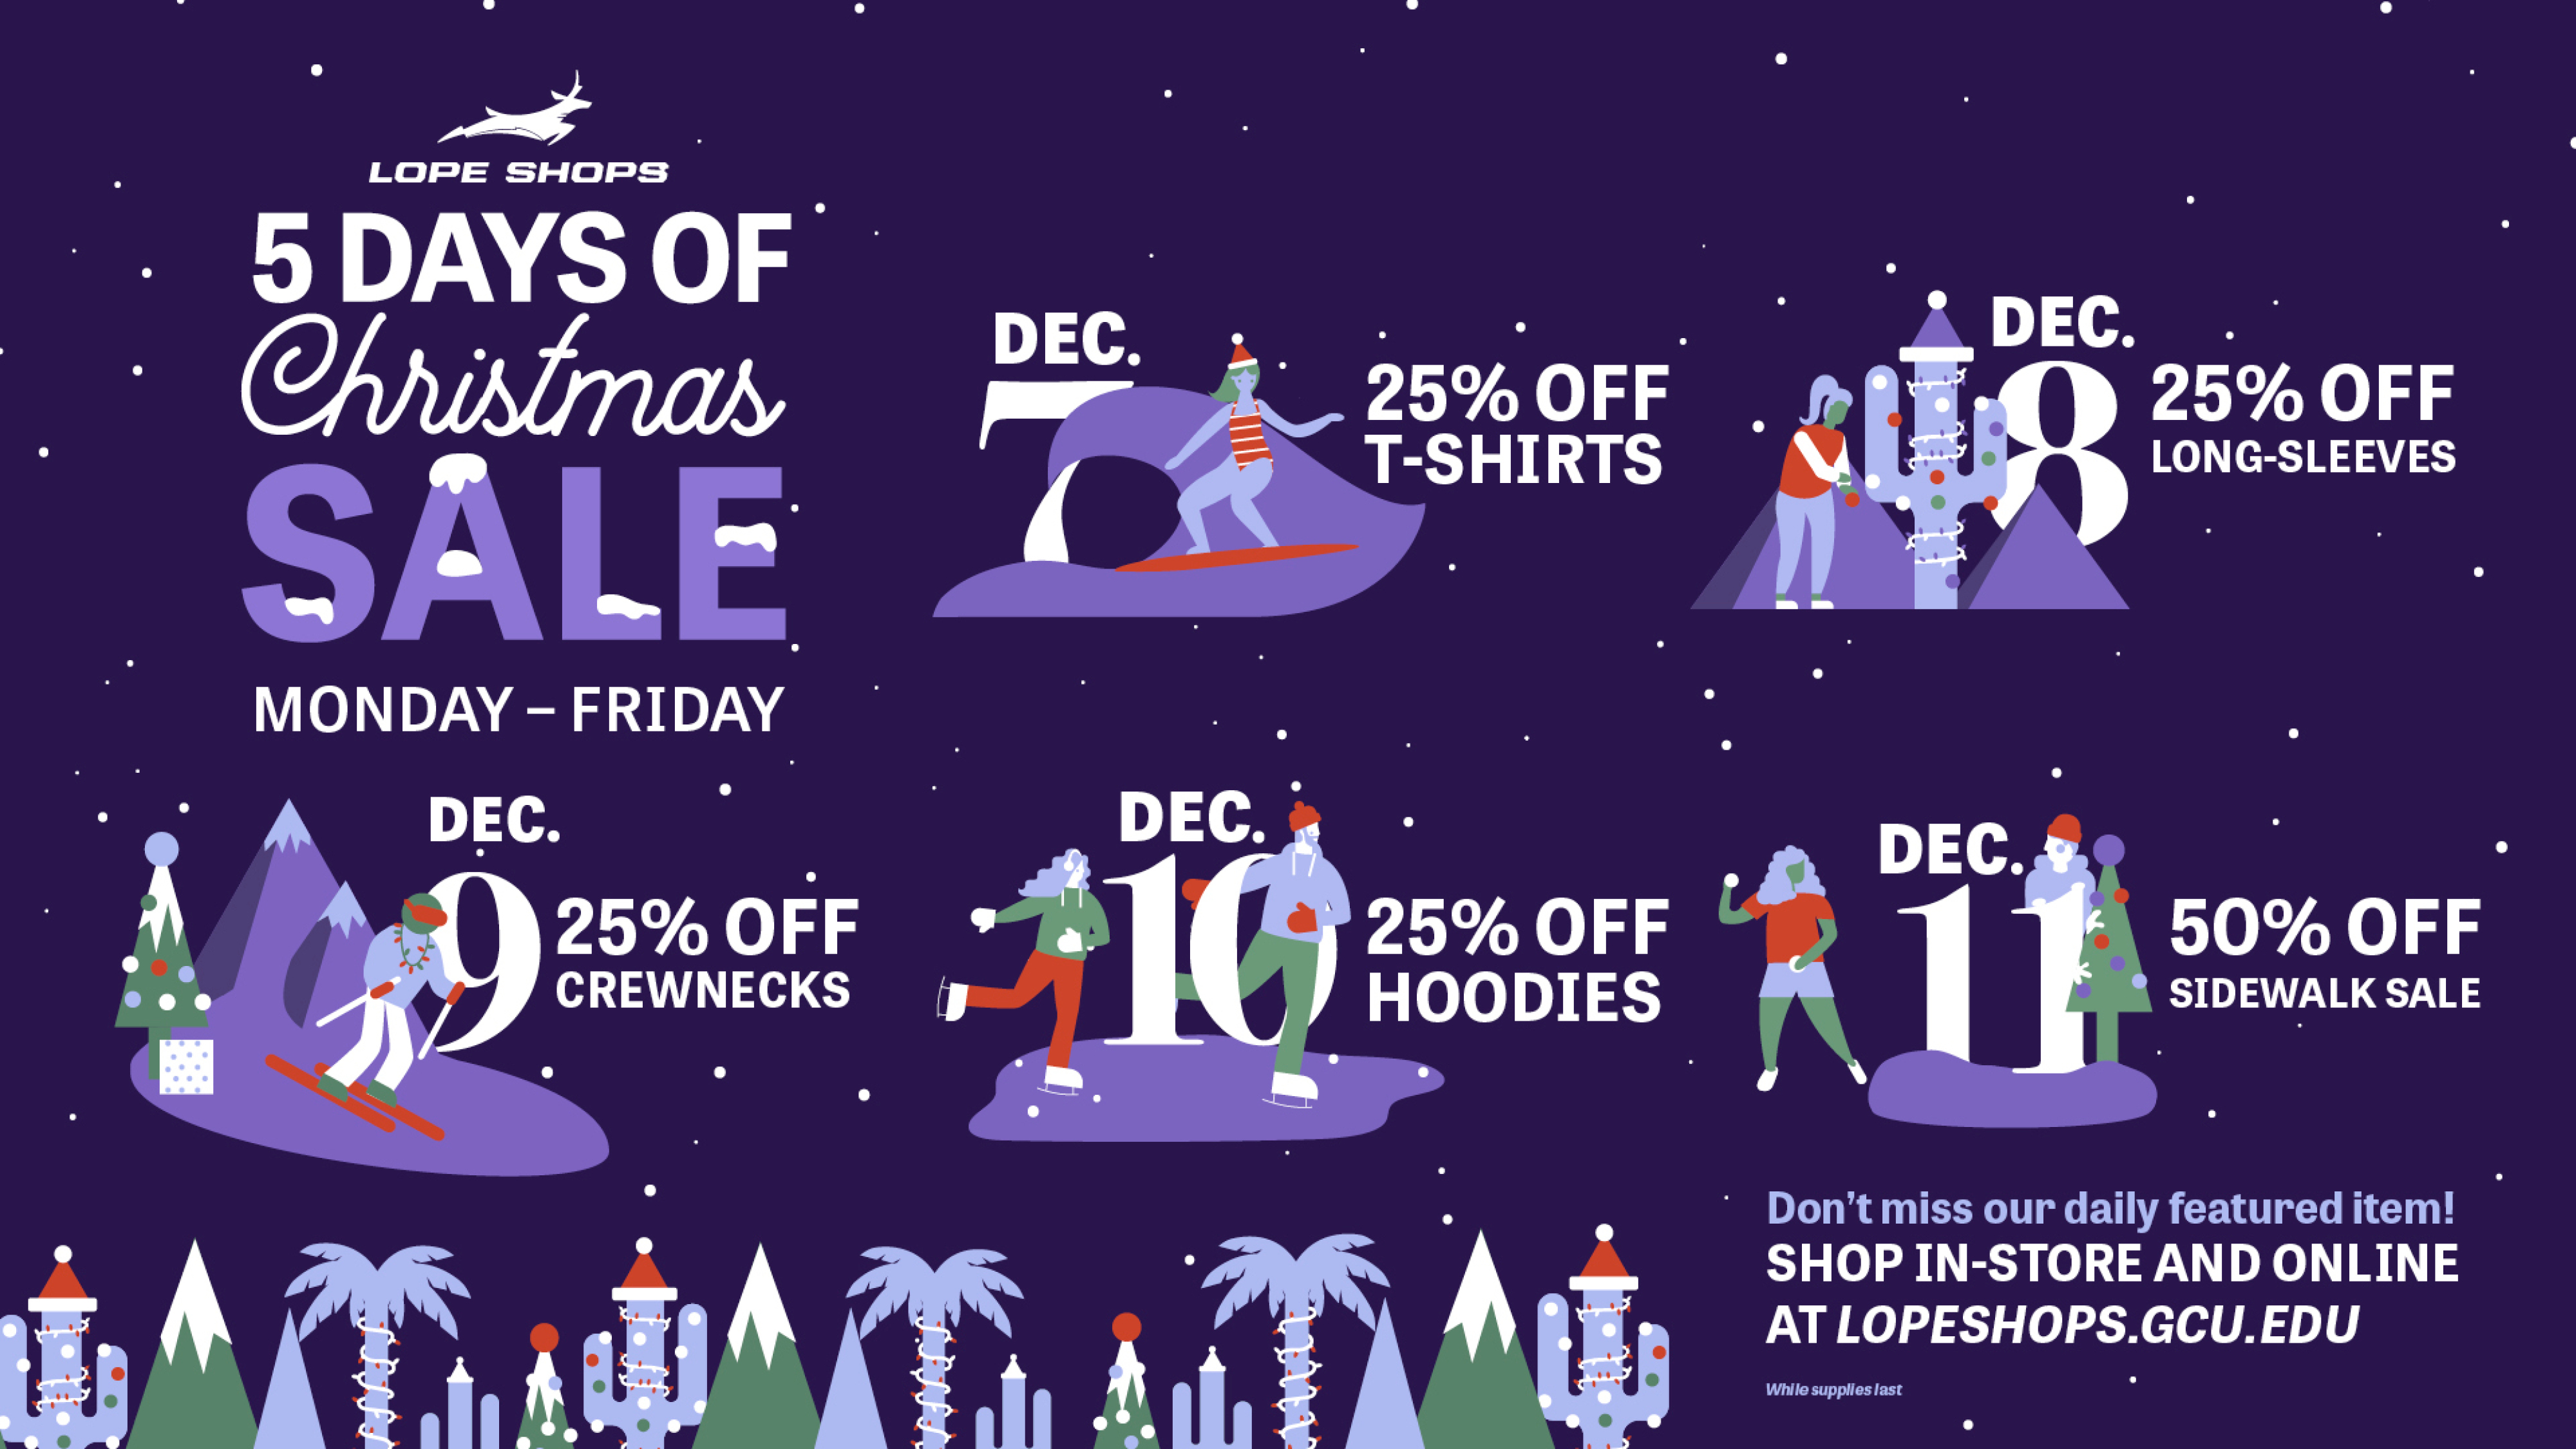 featured image:Lope Shops 5 Days of Christmas Sale